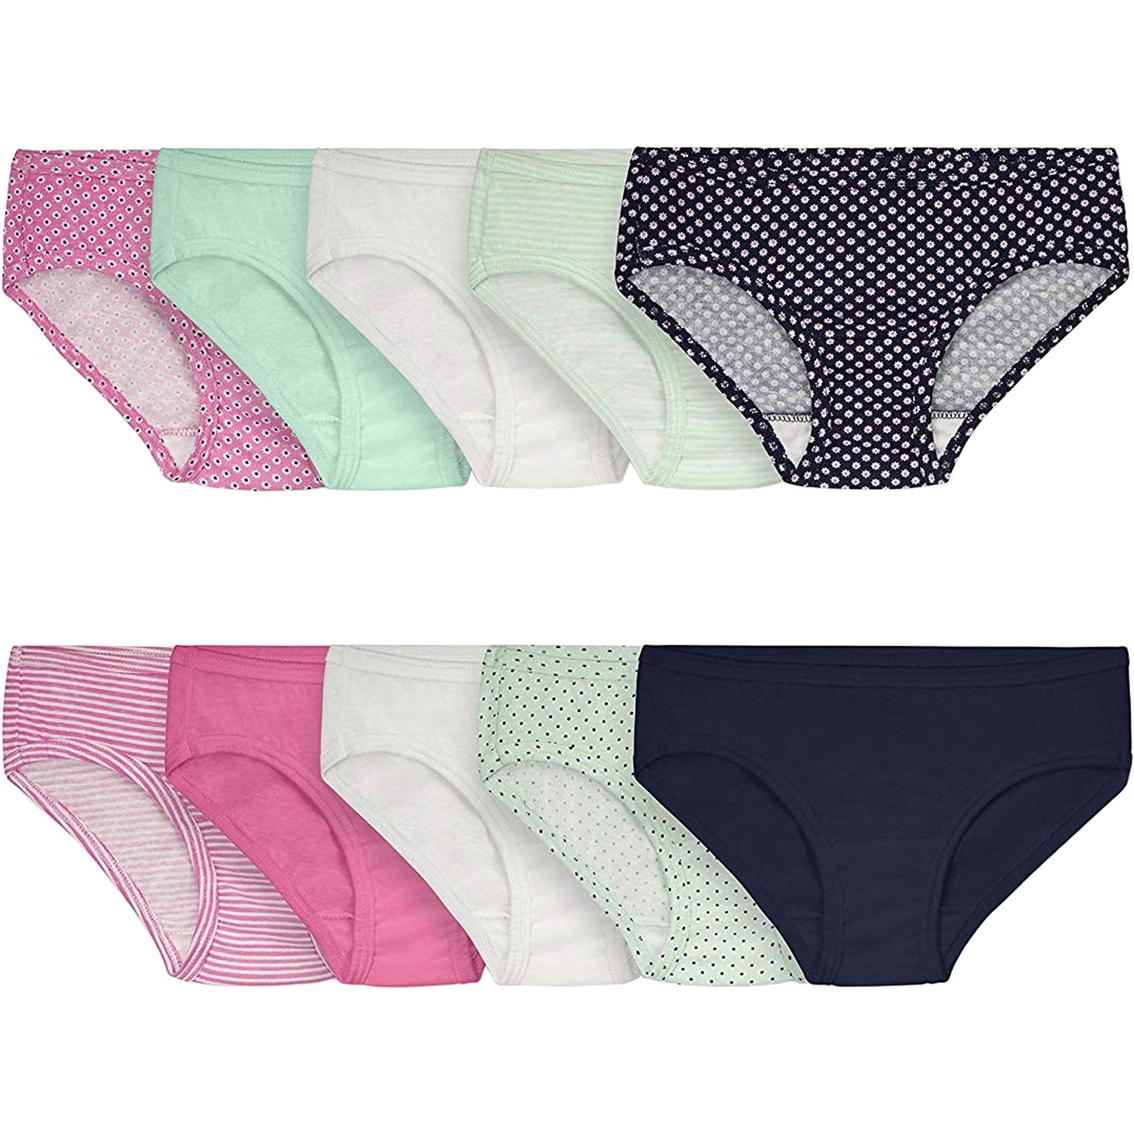 Fruit Of The Loom Girls Cotton Hipster Panties 10 Pk., Girls 7-16, Clothing & Accessories